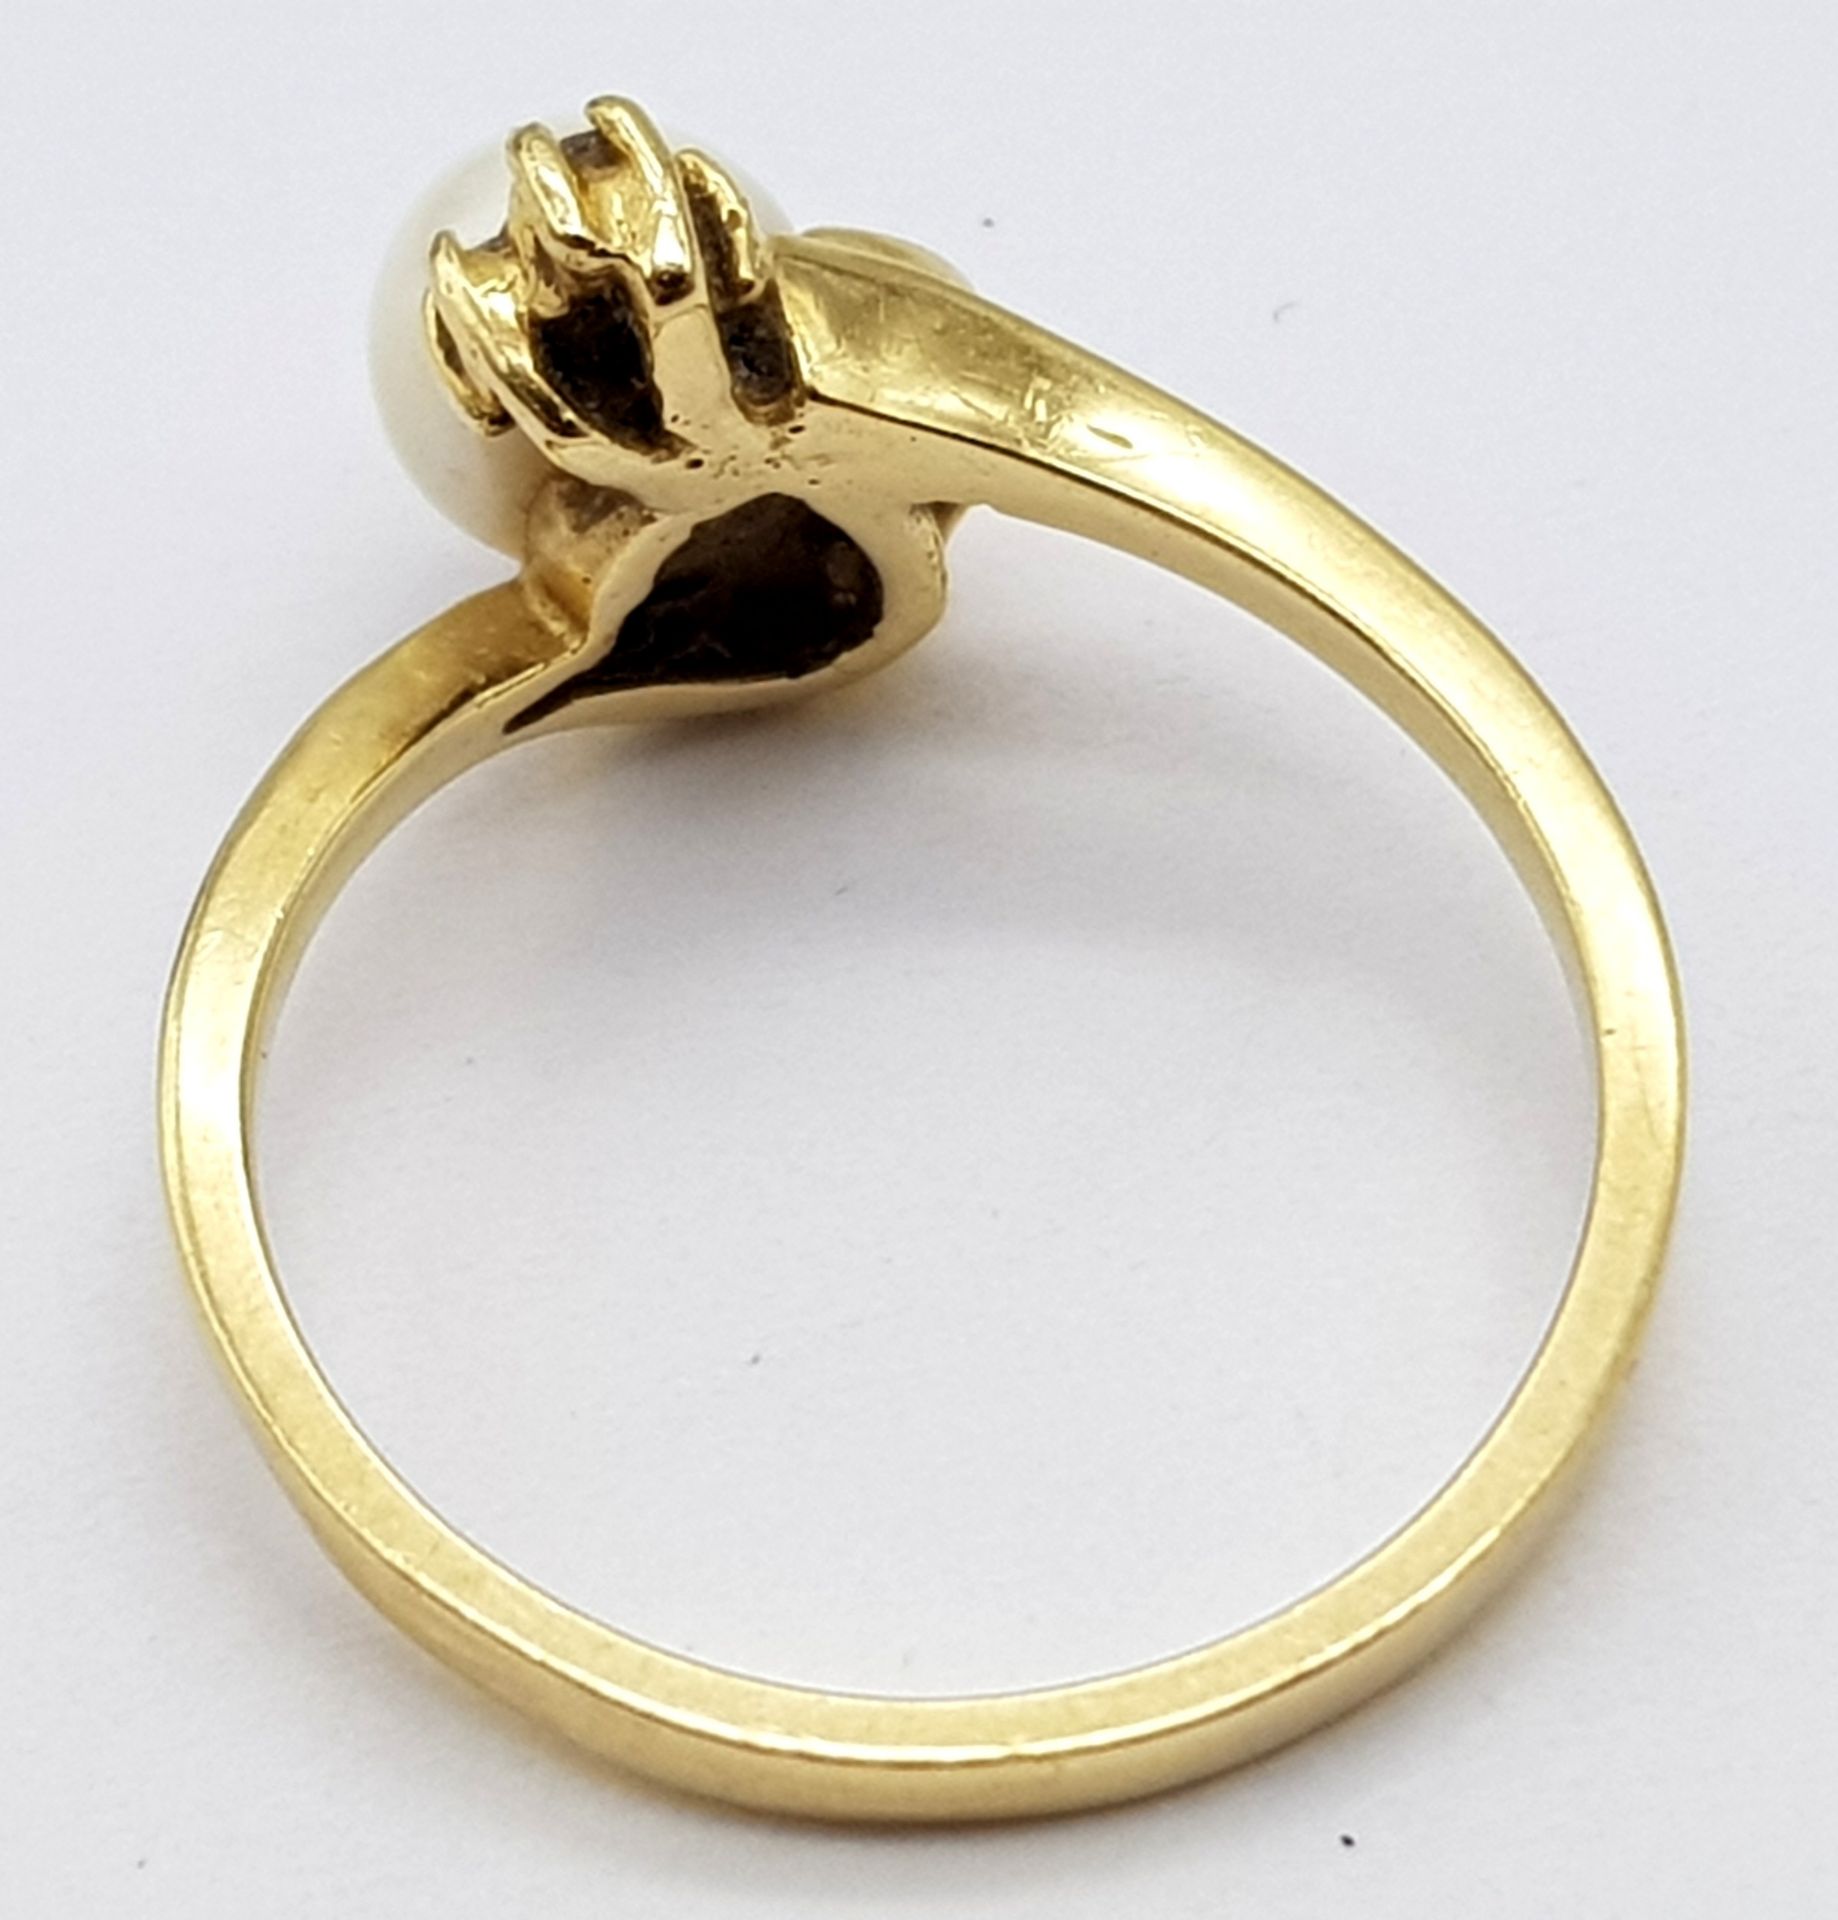 A Vintage 14K Yellow Gold Pearl and Diamond Crossover Ring. Size M. 2.65g total weight. - Image 4 of 5